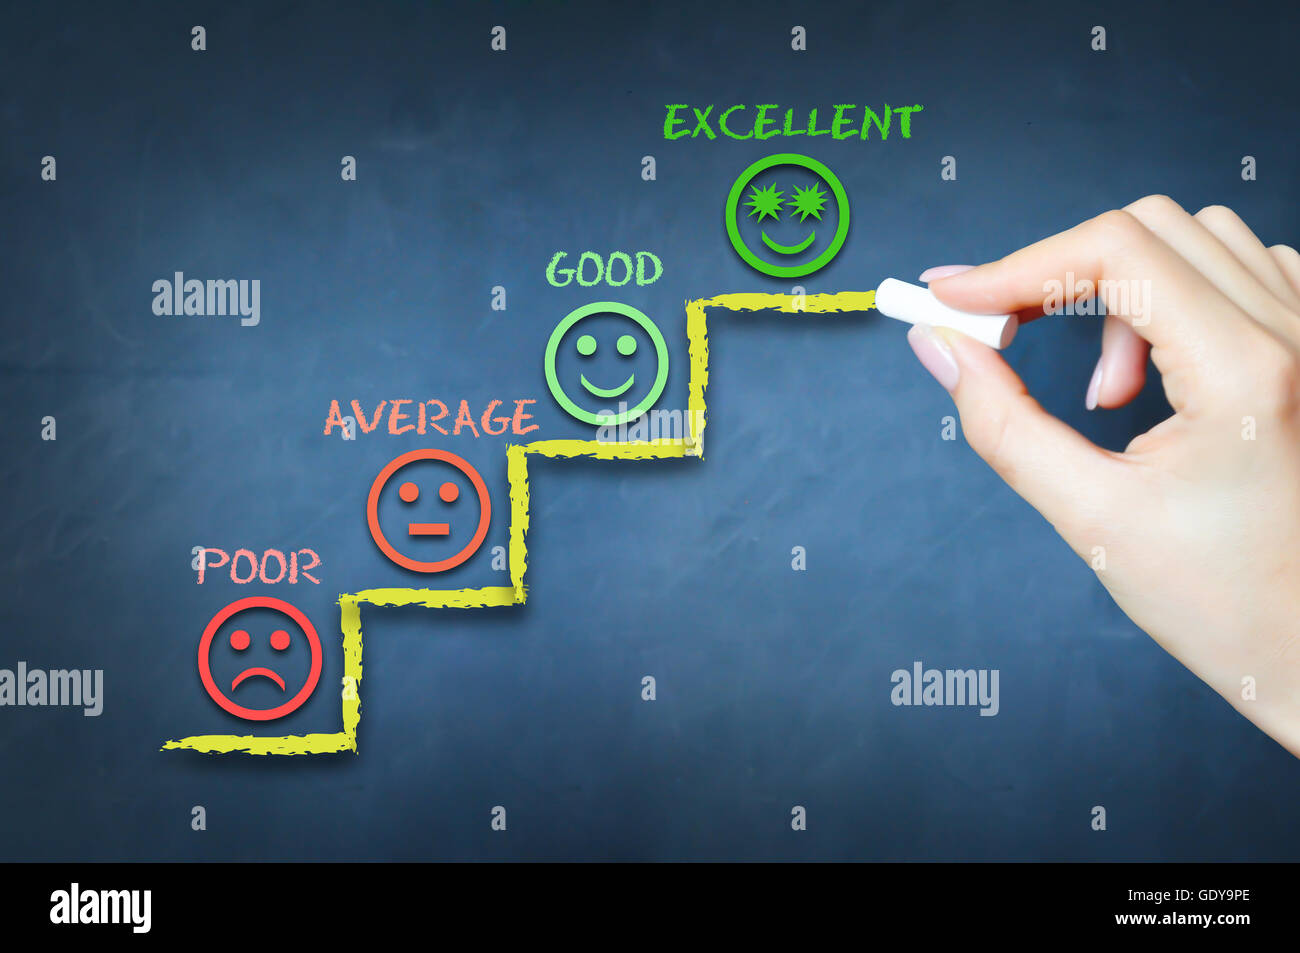 Customer satisfaction or evaluation of business performance Stock Photo